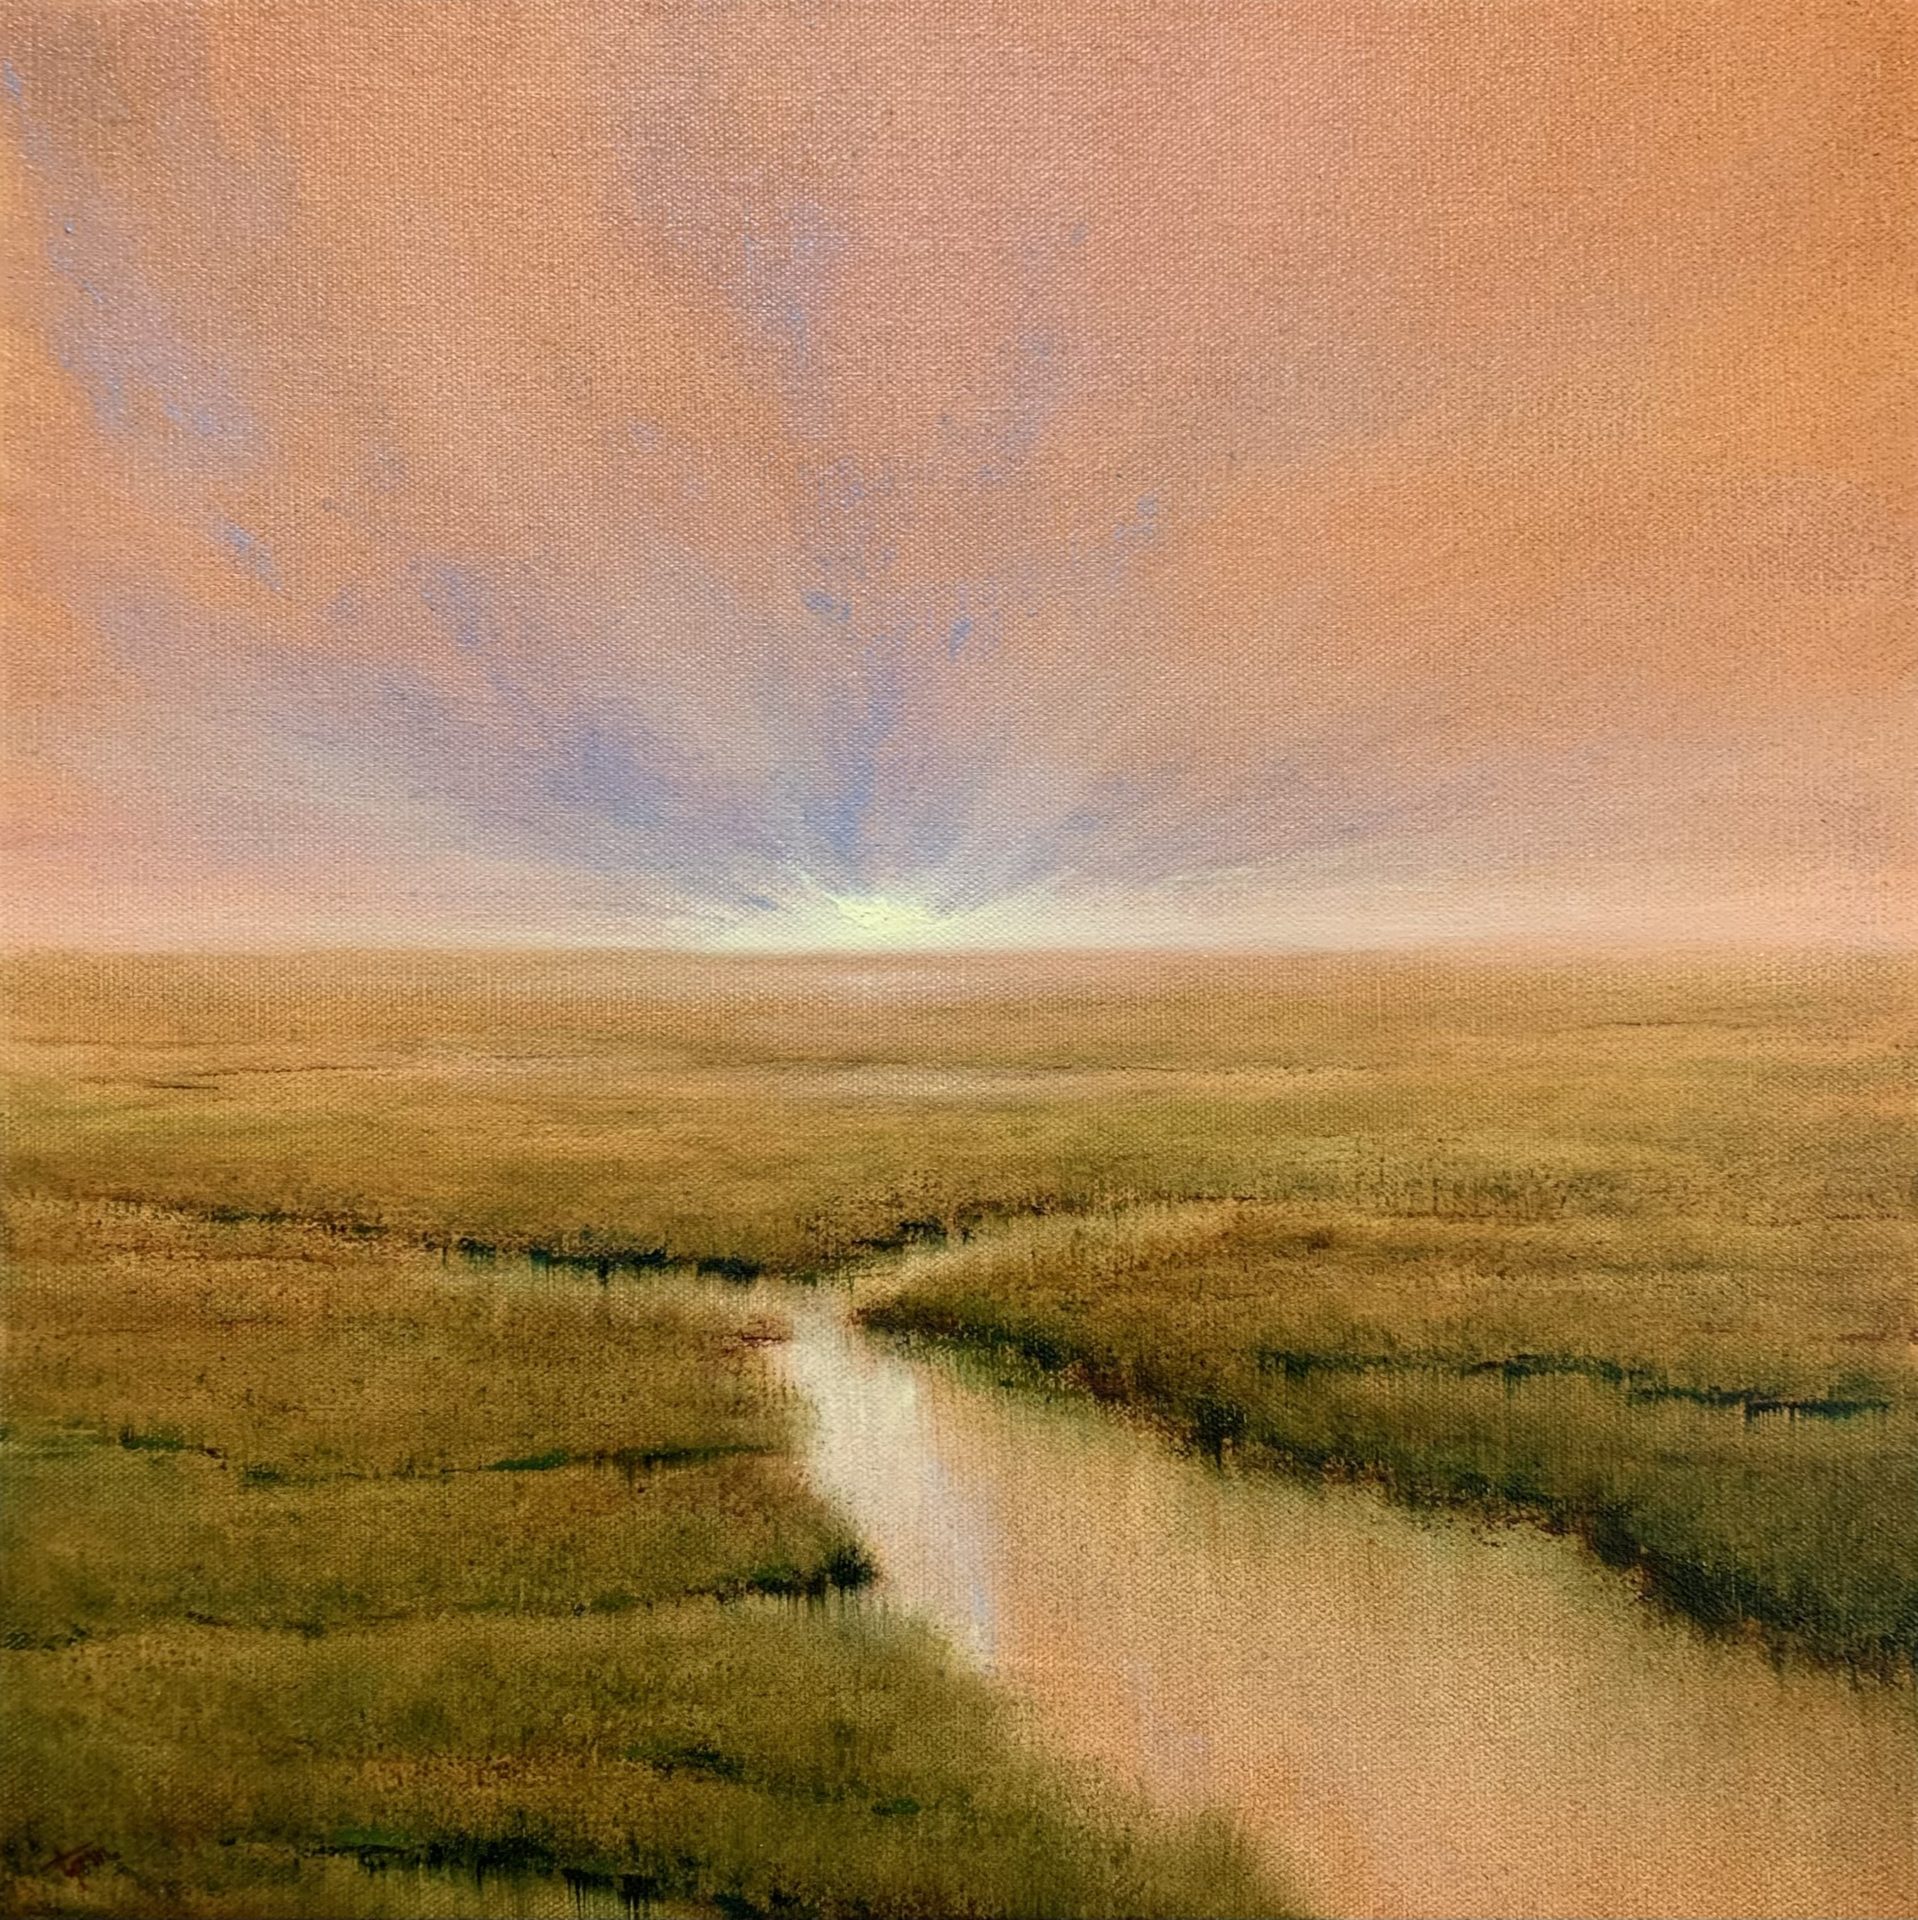 Original oil painting by Tisha Mark, "Awake (Week 16, 62 Weeks of Finding Light Series)" 16"x16" oil on canvas. Painting shows a marshy landscape underneath an orange-toned sunrise or sunset sky.